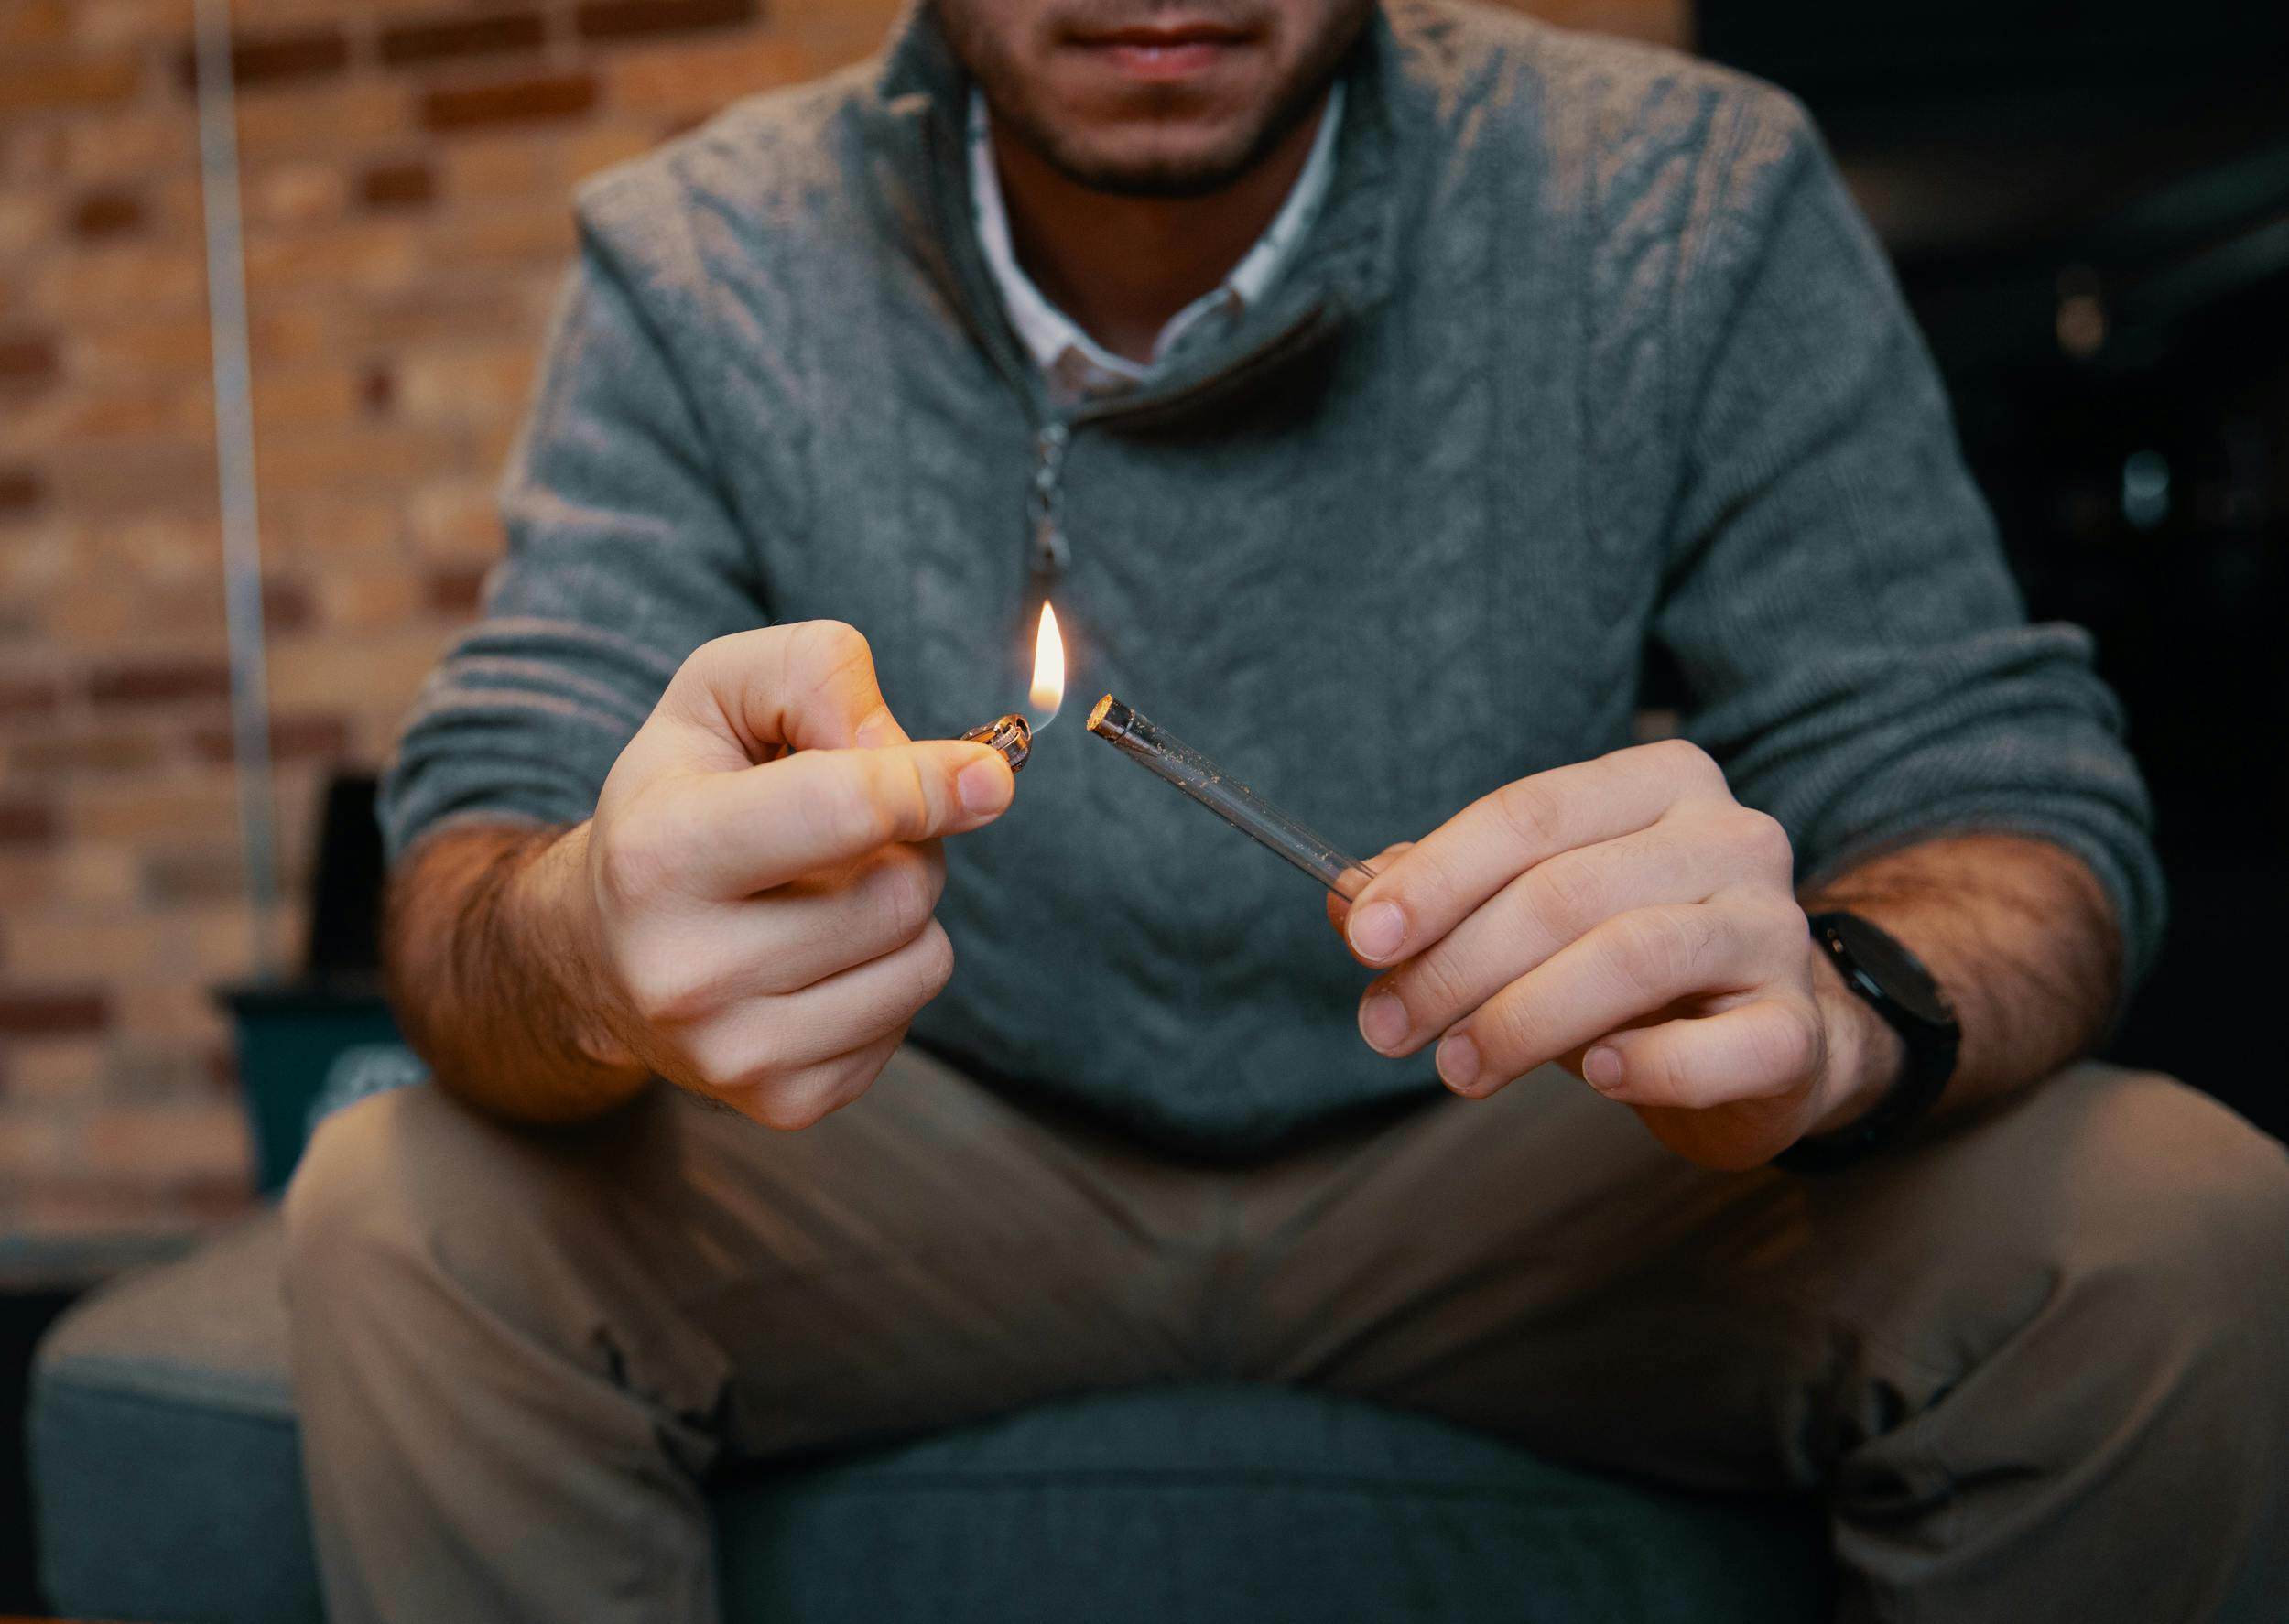 After learning how to make a pipe out of a pen, a man lights cannabis in a pen pipe